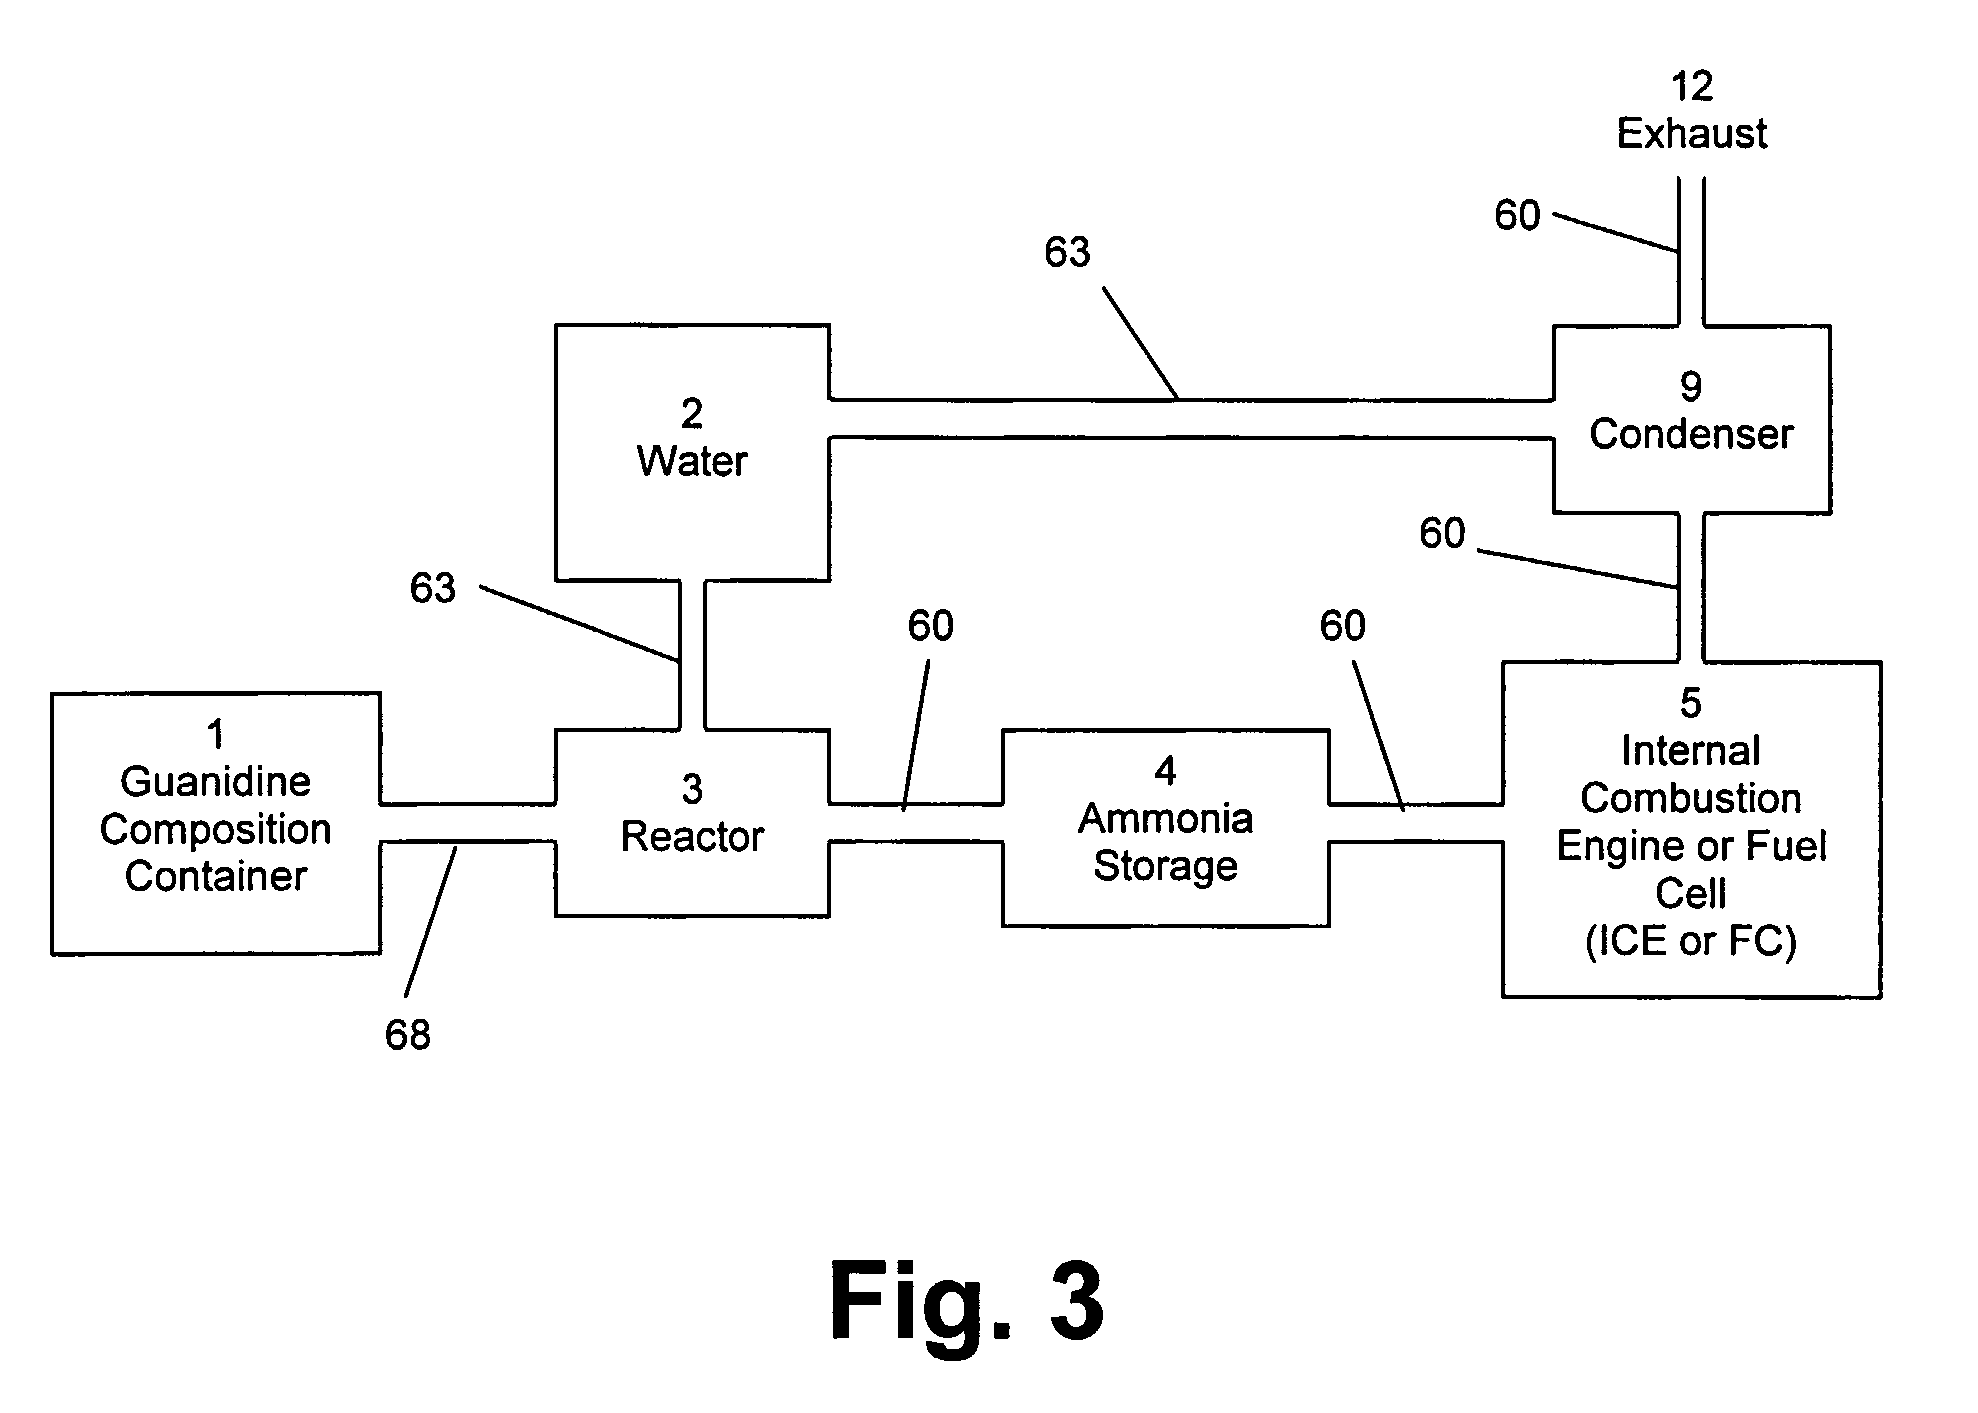 Guanidine Based Composition and System for Same